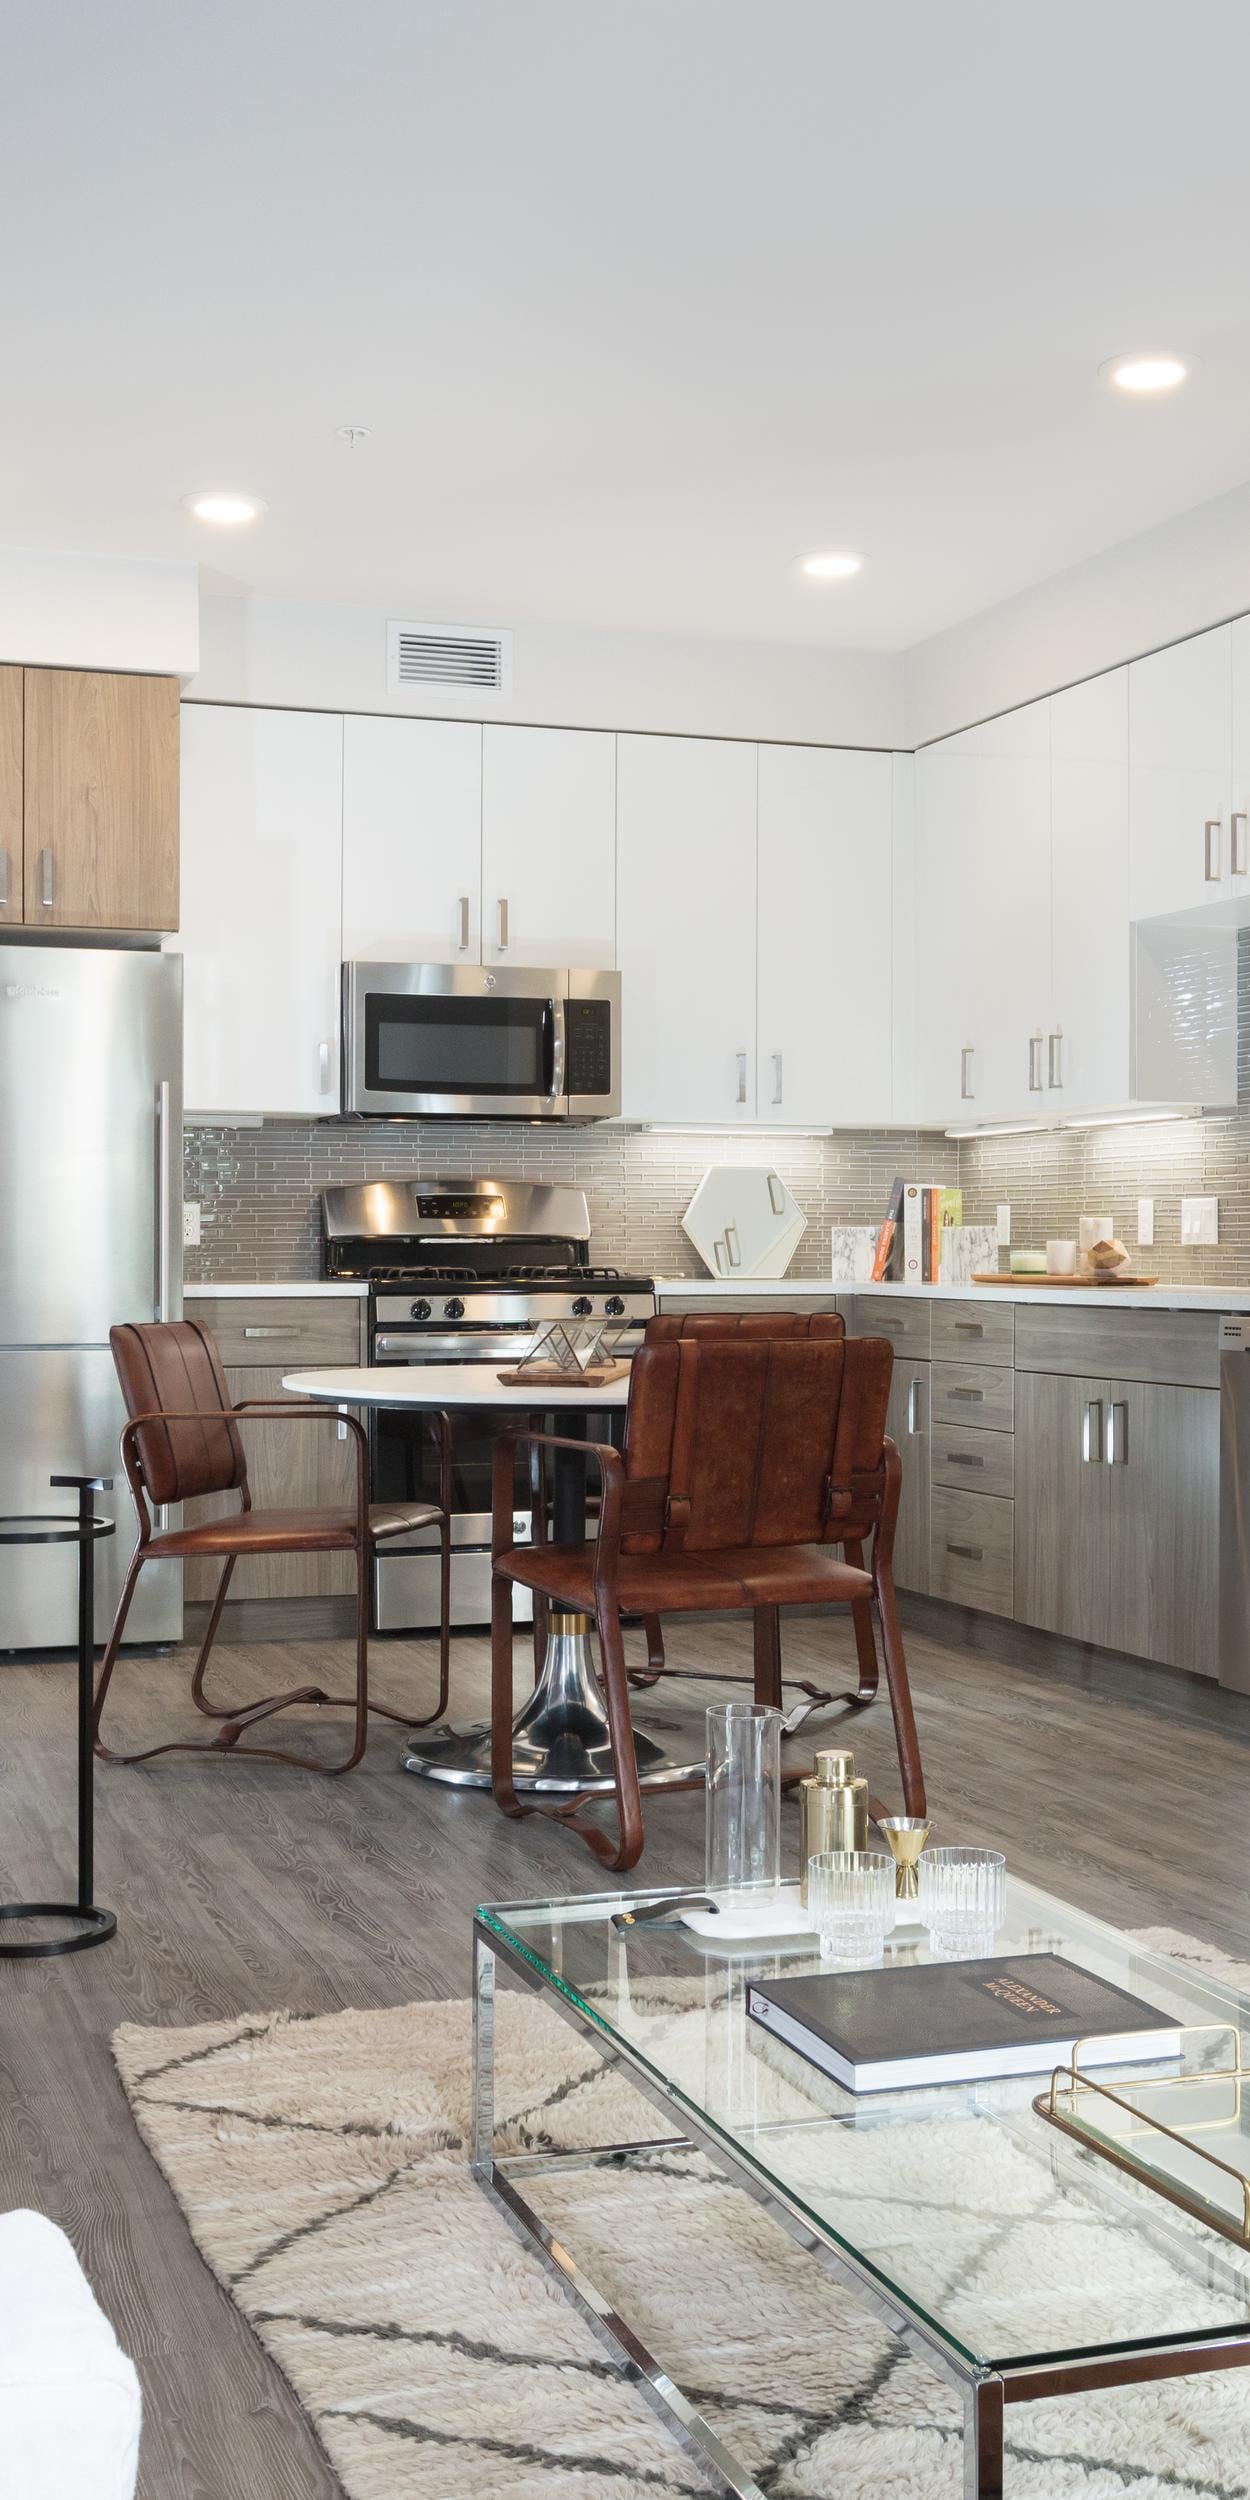 Menlo Park CA Apartments for Rent - Spacious Kitchen with Modern Interiors Fully Equipped with Stainless Steel Amenities Such As Fridge, Stove, and Microwave